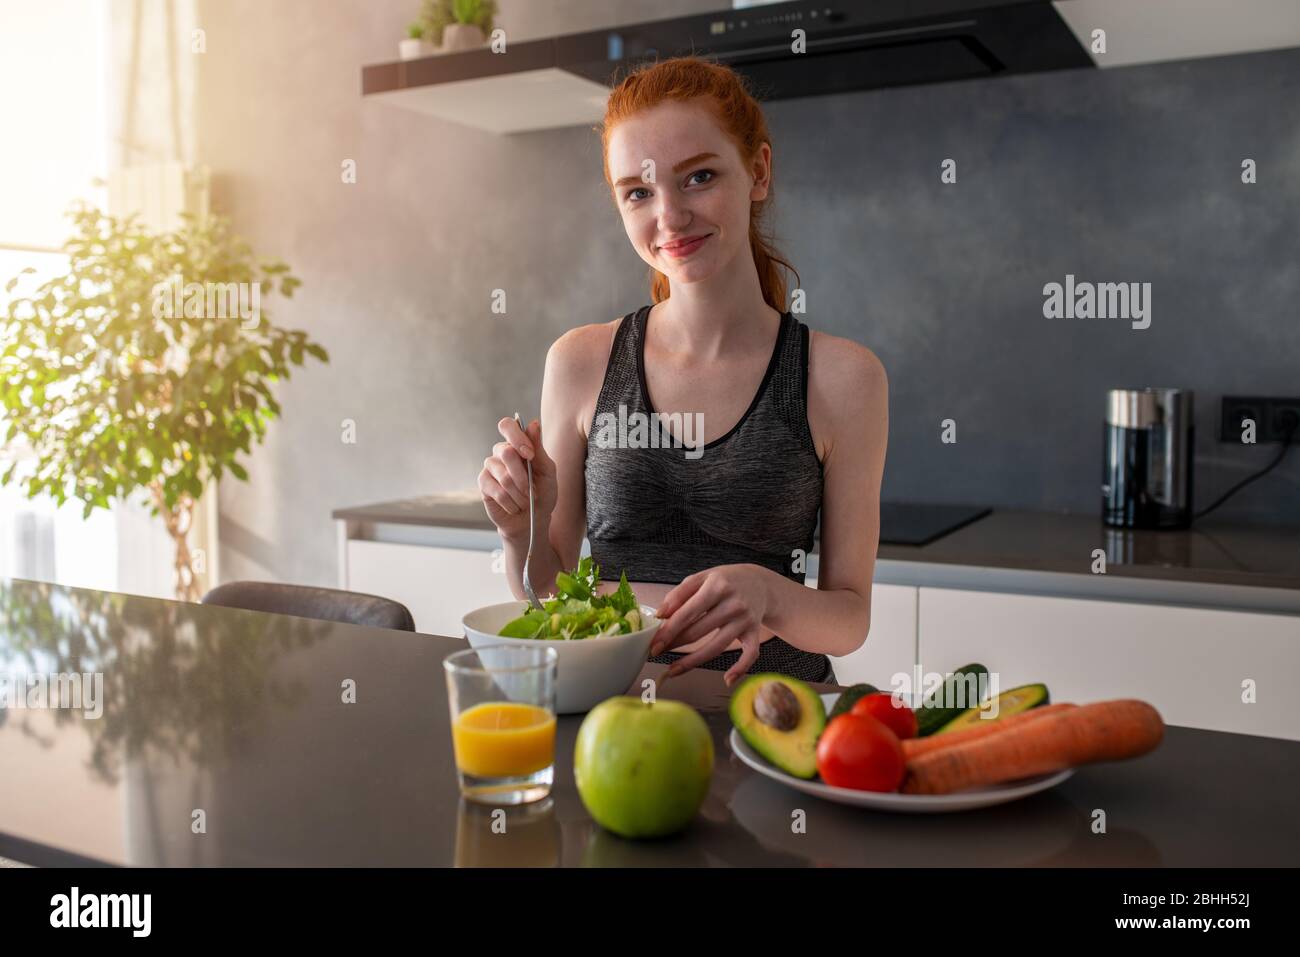 Athletic girl with gym clothes eats a salad in the kitchen Stock Photo